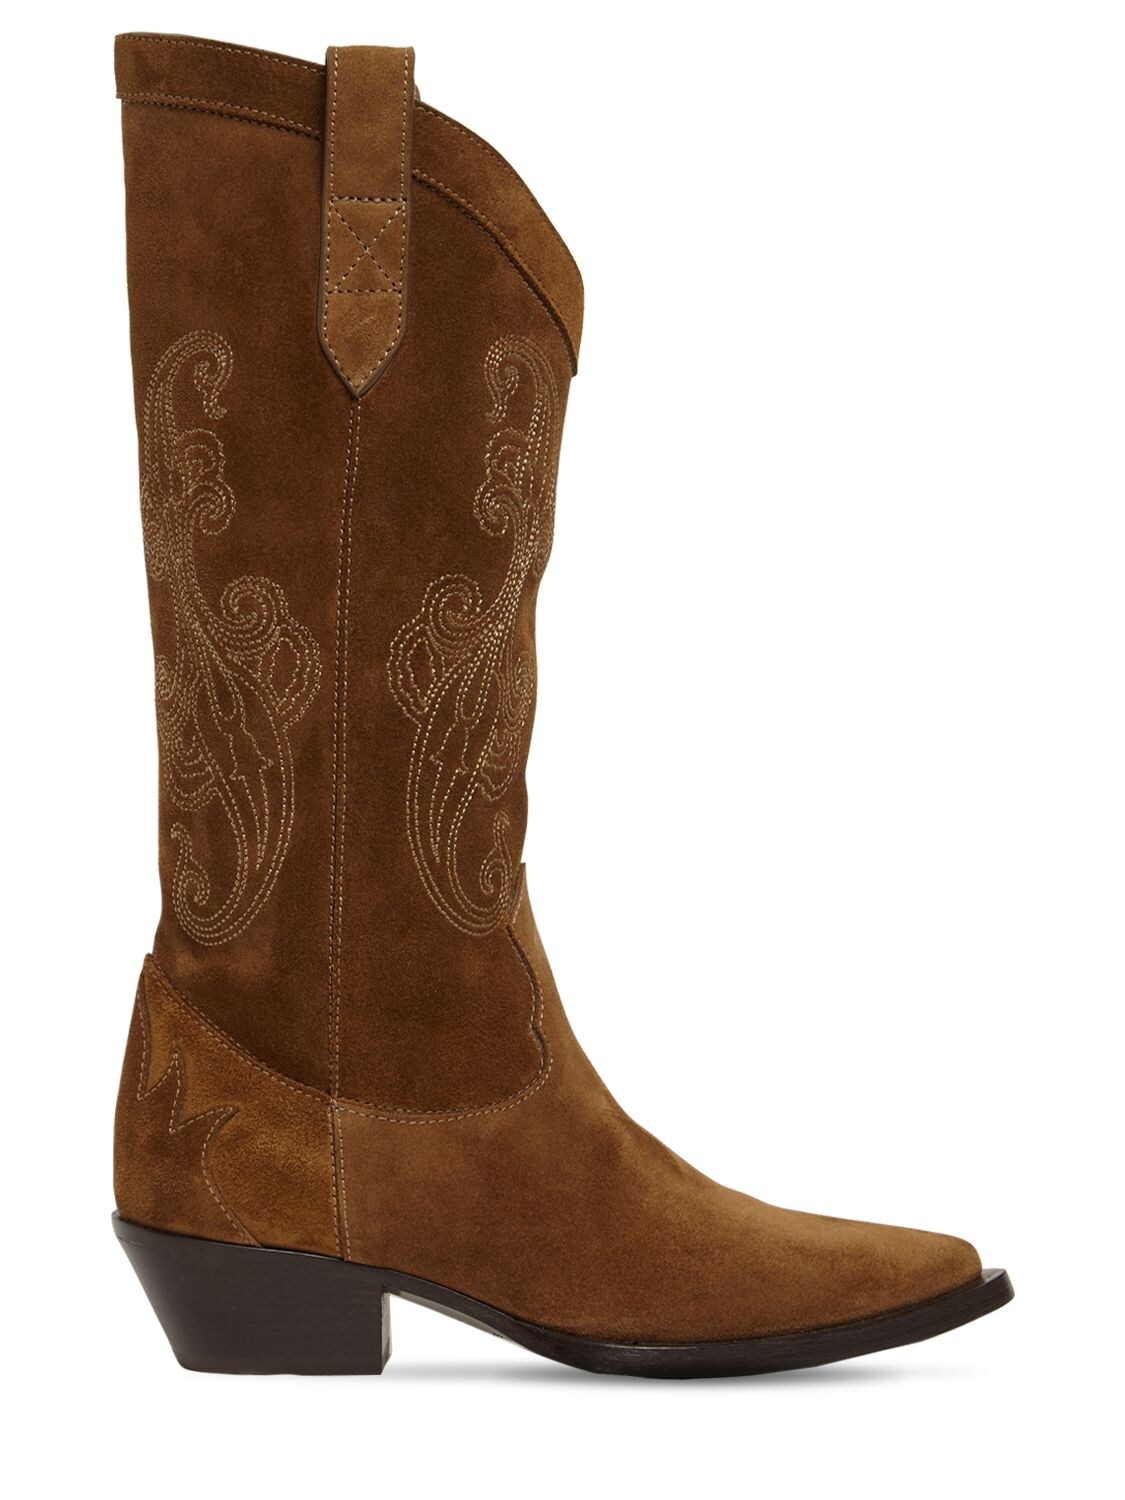 40mm Western Suede Tall Boots